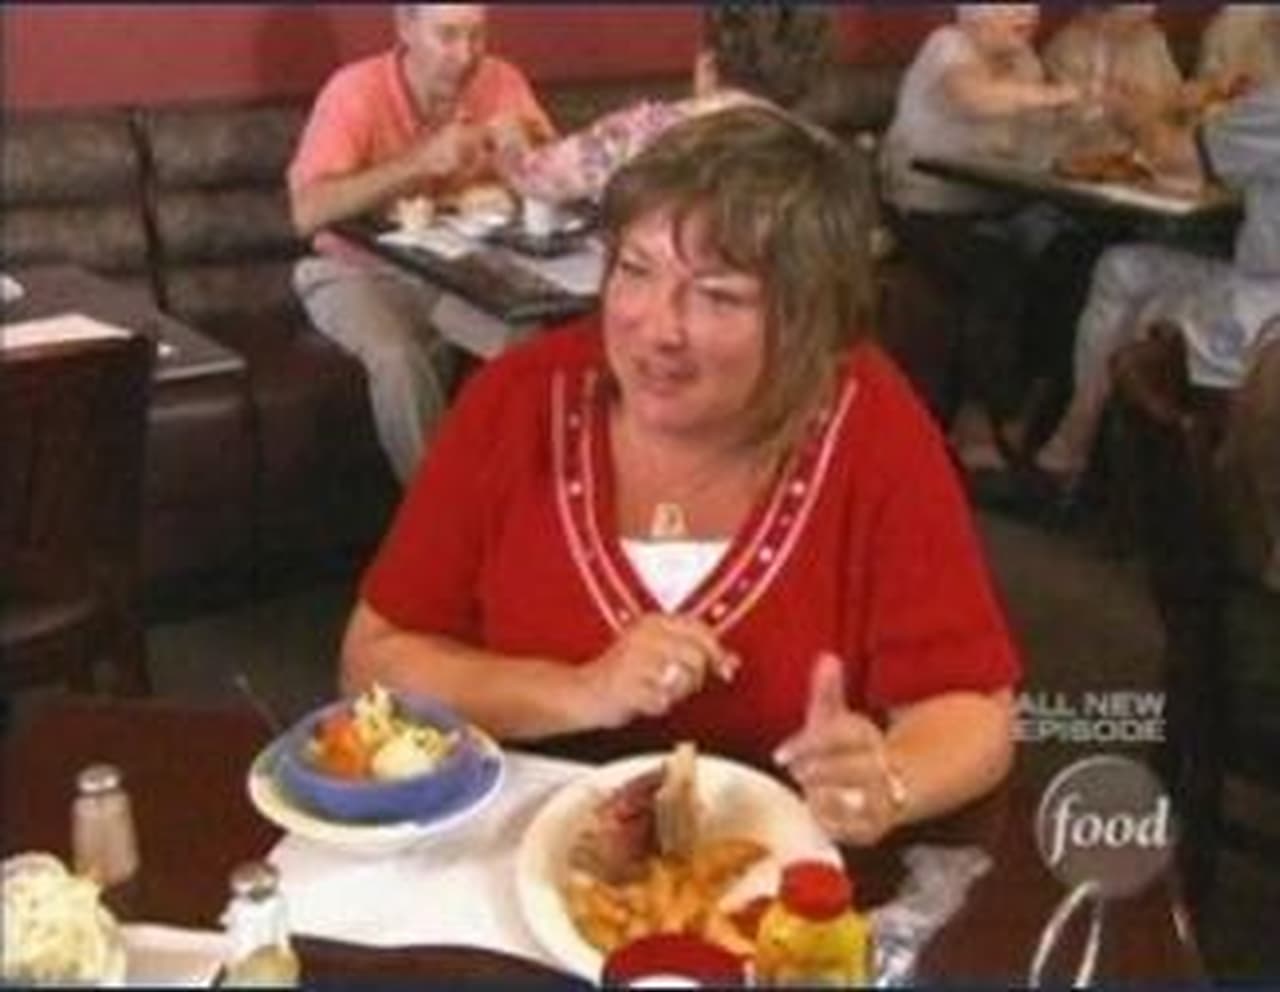 Diners, Drive-Ins and Dives - Season 6 Episode 5 : Biscuits, Bagels & BLT's